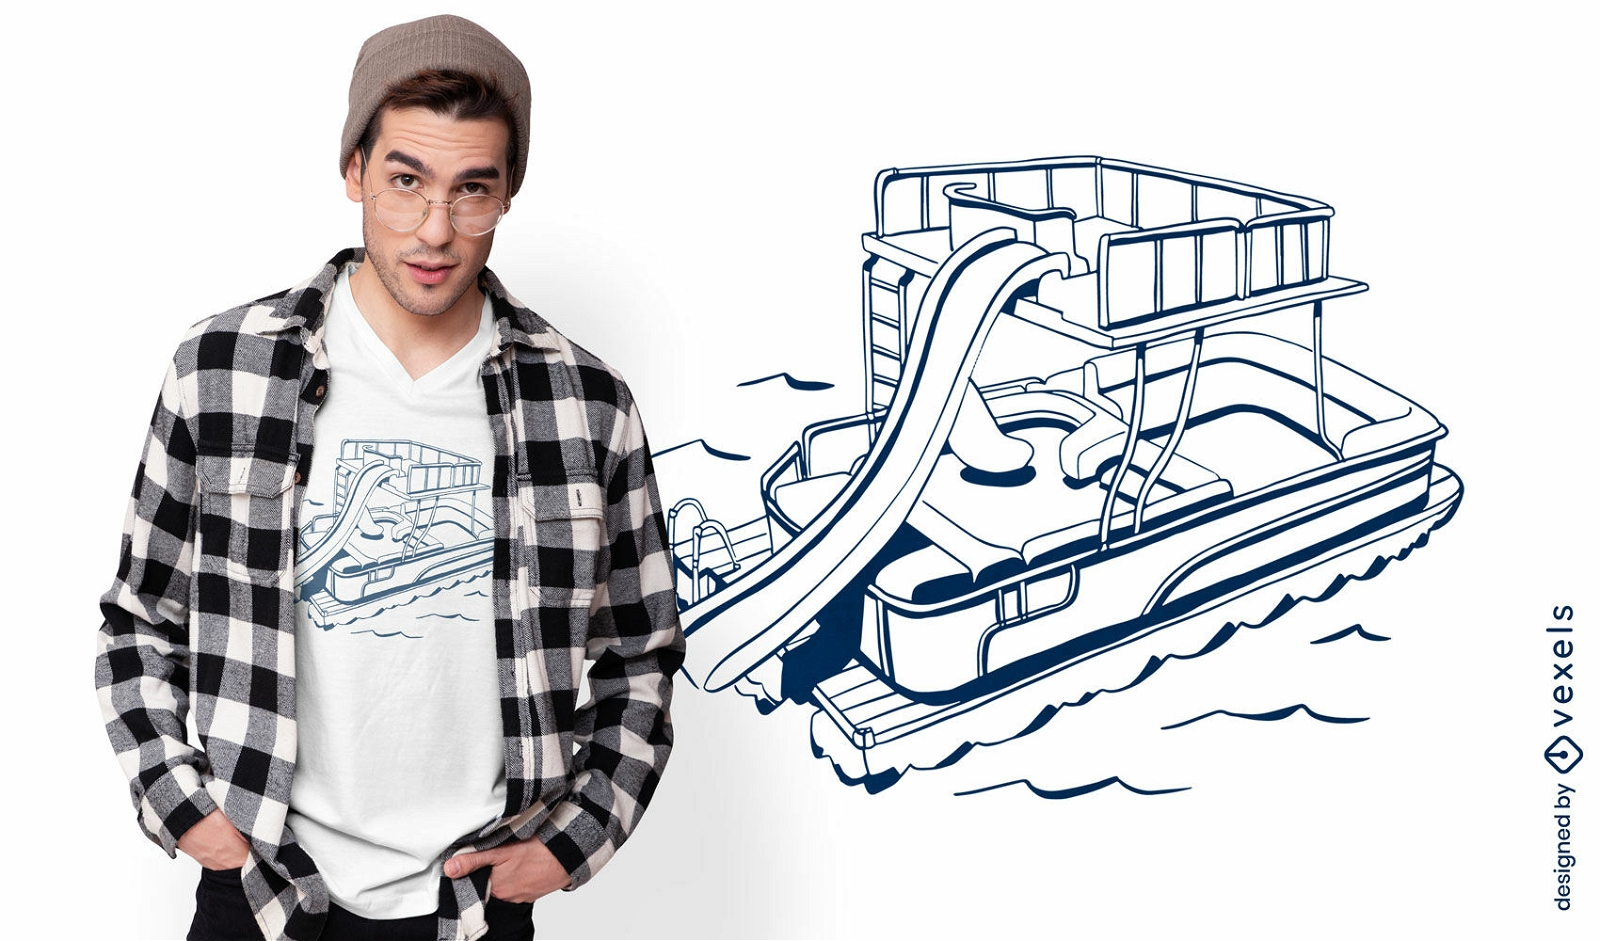 Ship with water slide t-shirt design